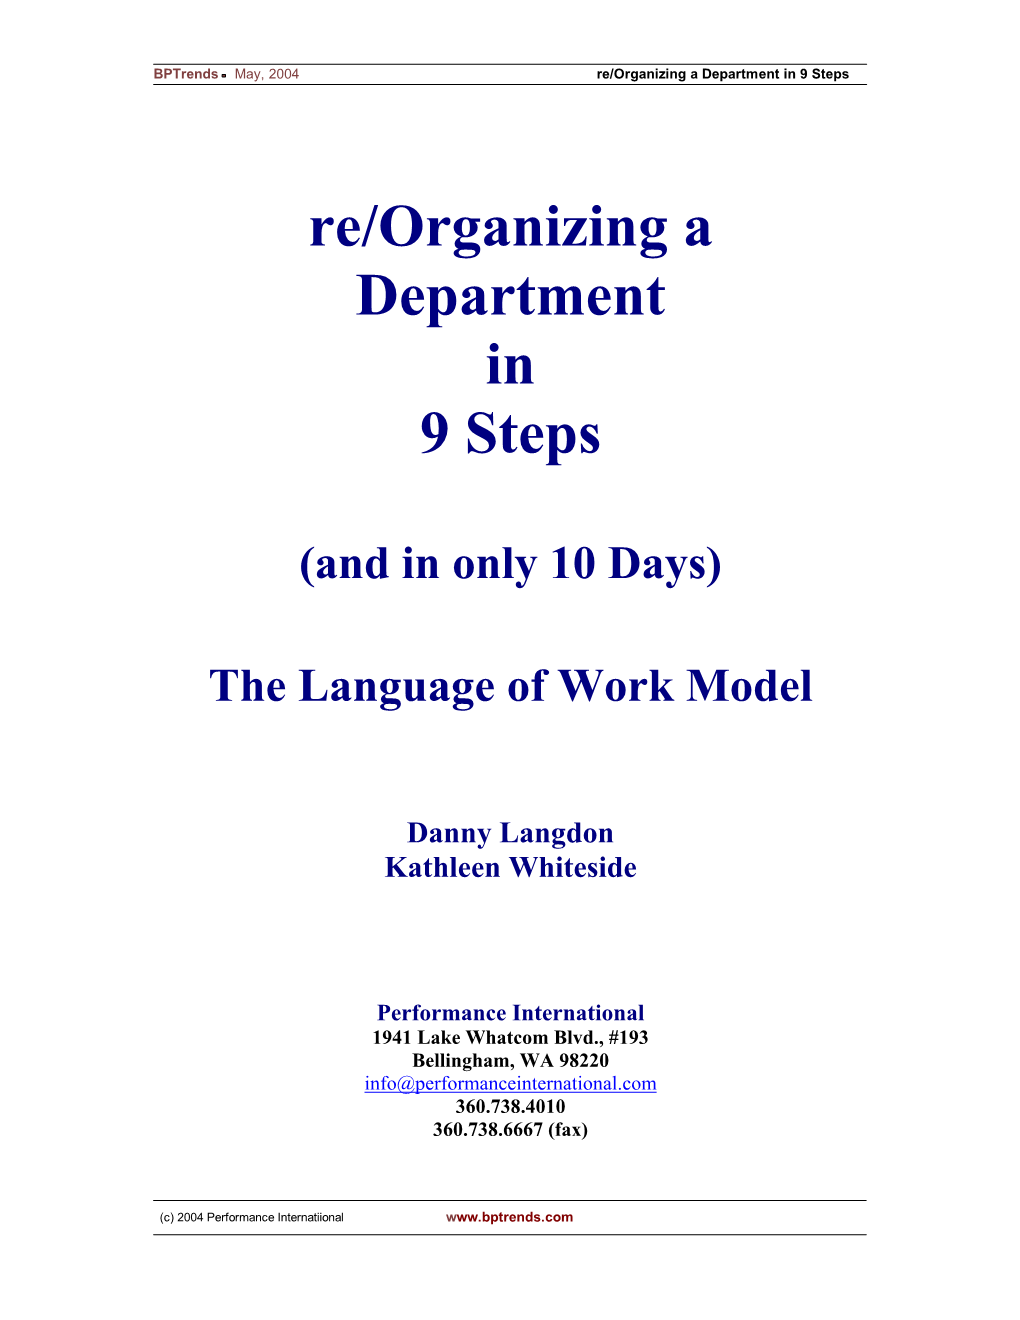 Re/Organizing a Department in 9 Steps